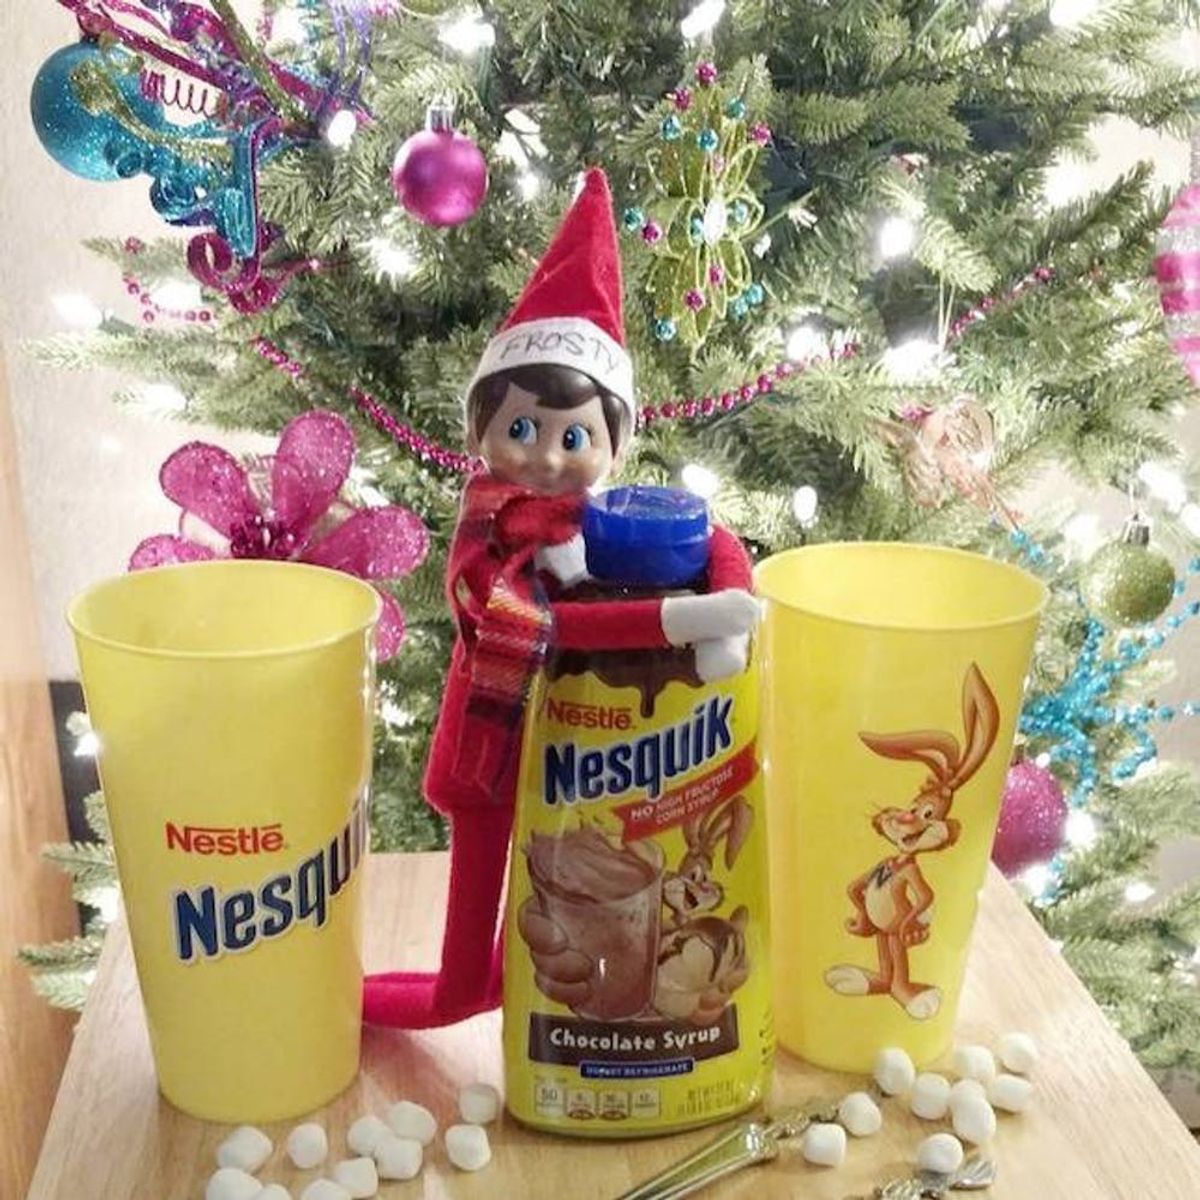 20 Elf on the Shelf Ideas from Instagram That Are Almost Too Cute to Handle